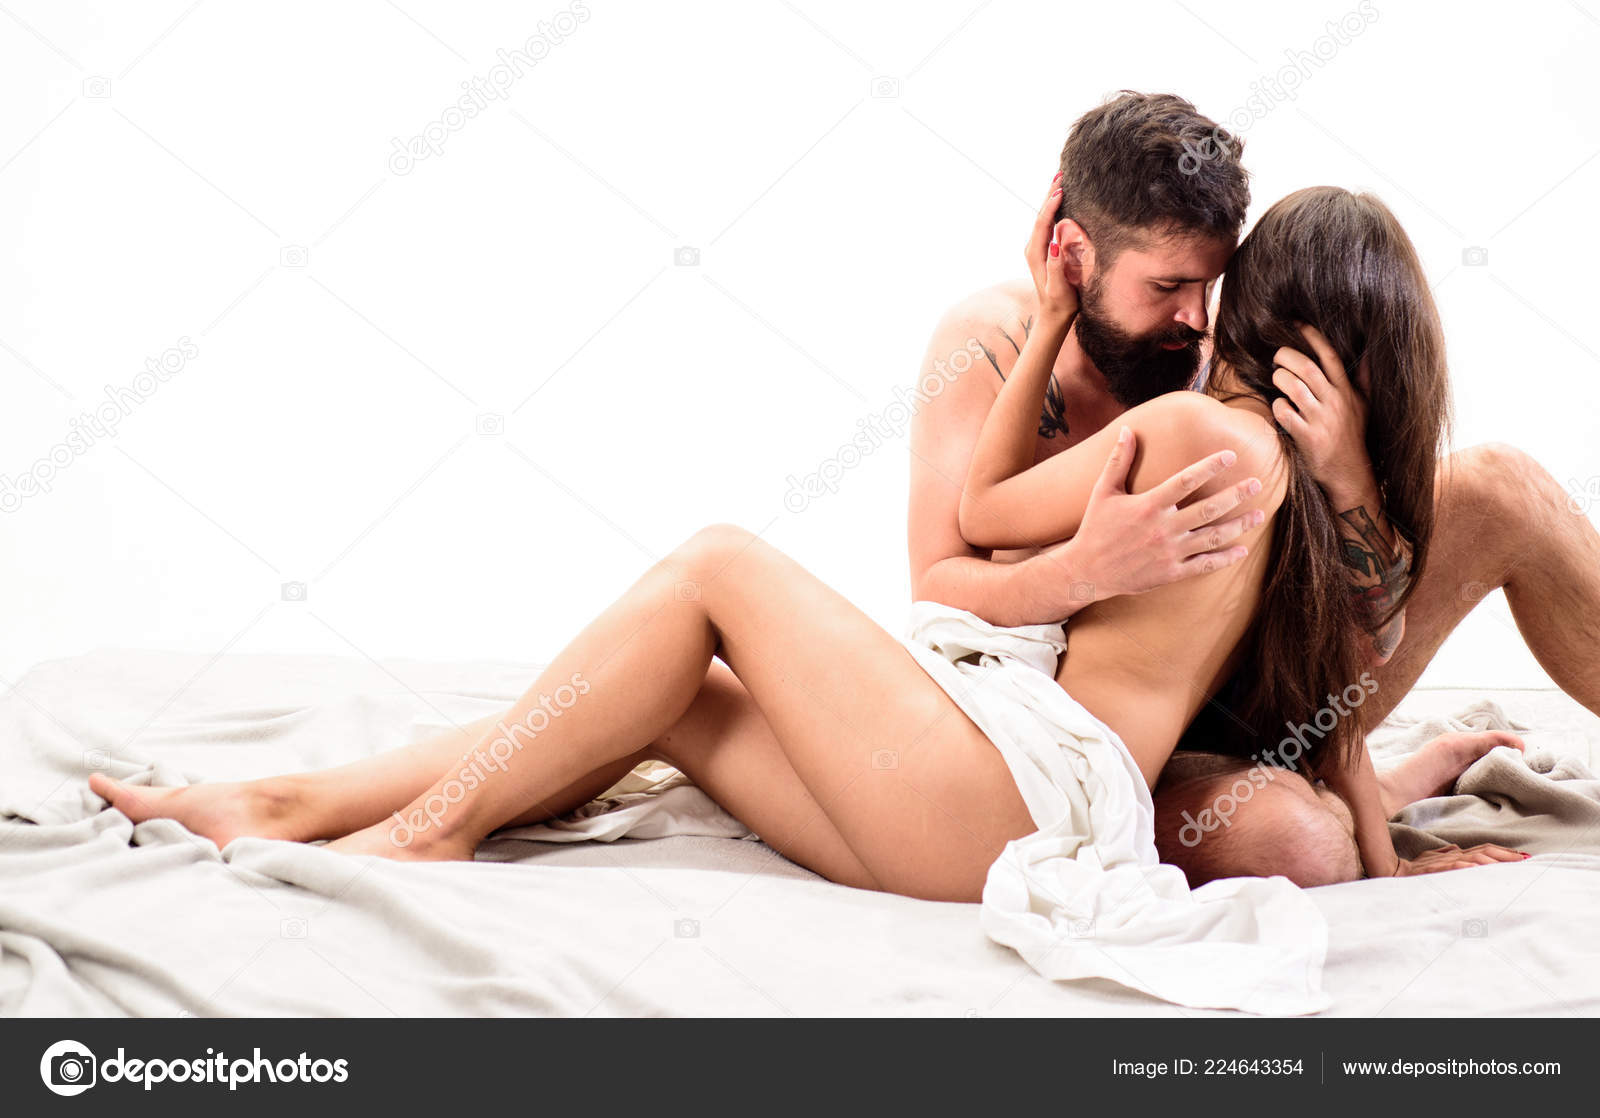 Women Masturbating In Bed Reading A Book